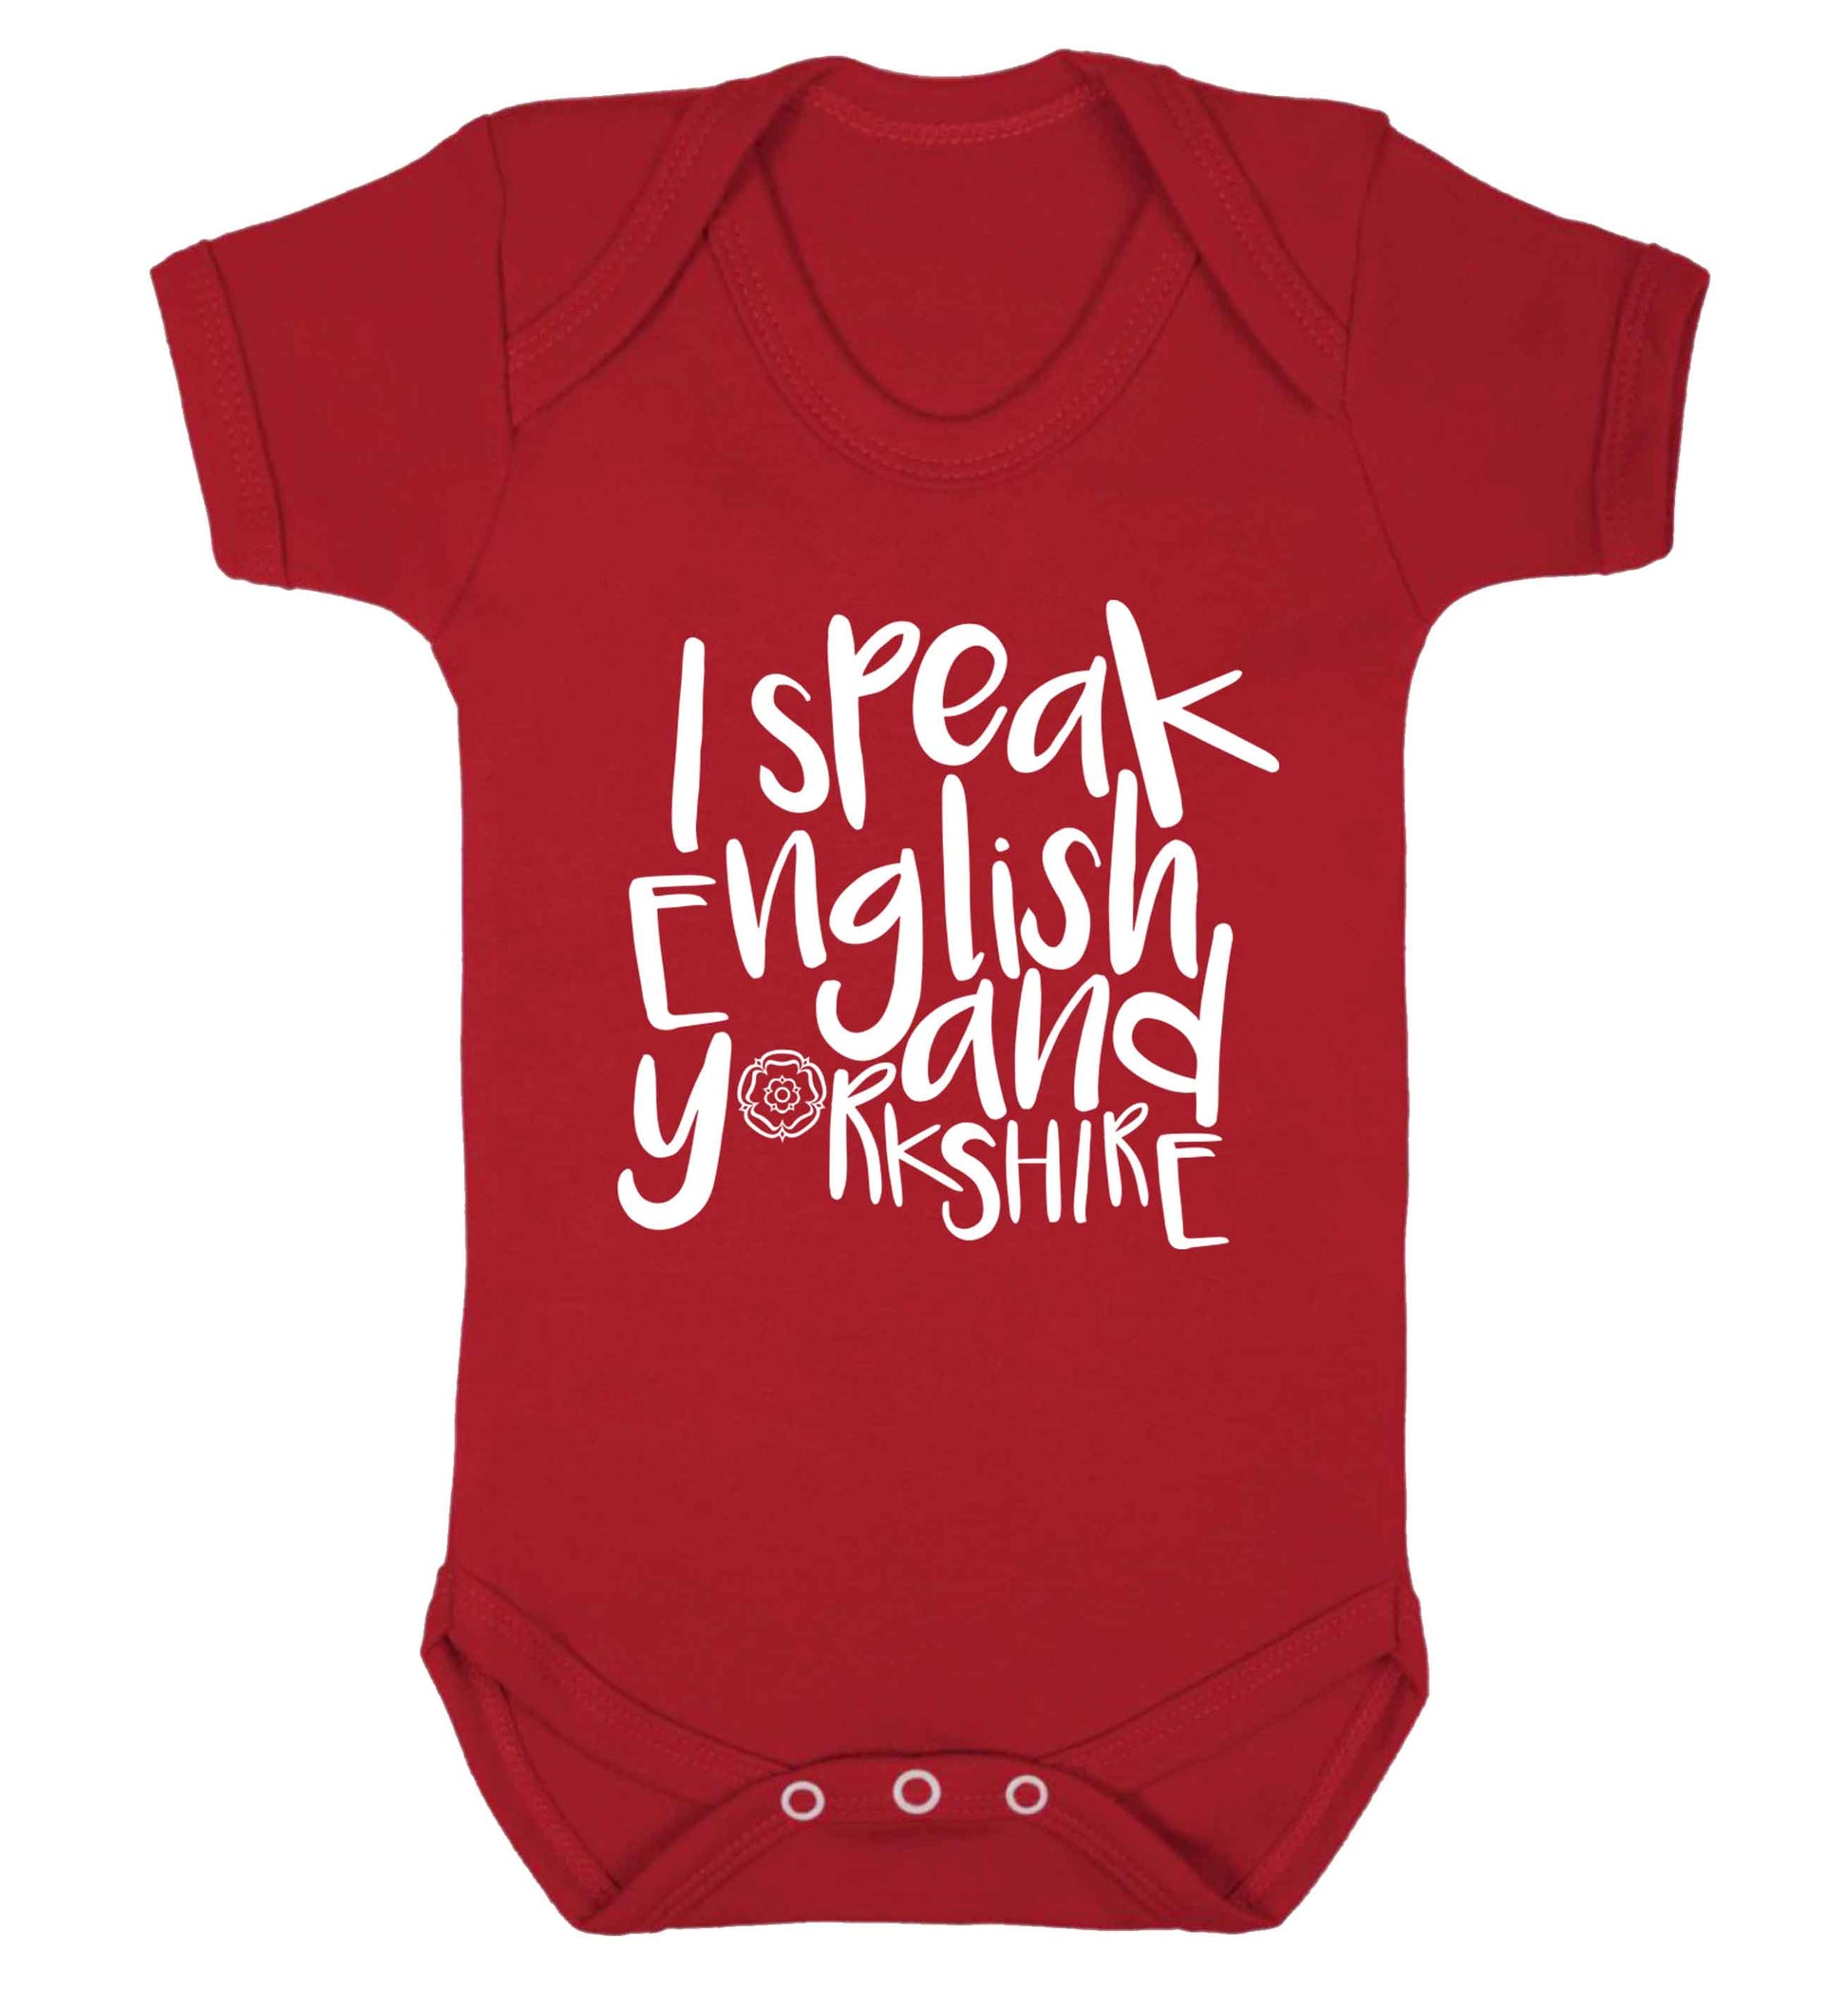 I speak English and Yorkshire Baby Vest red 18-24 months